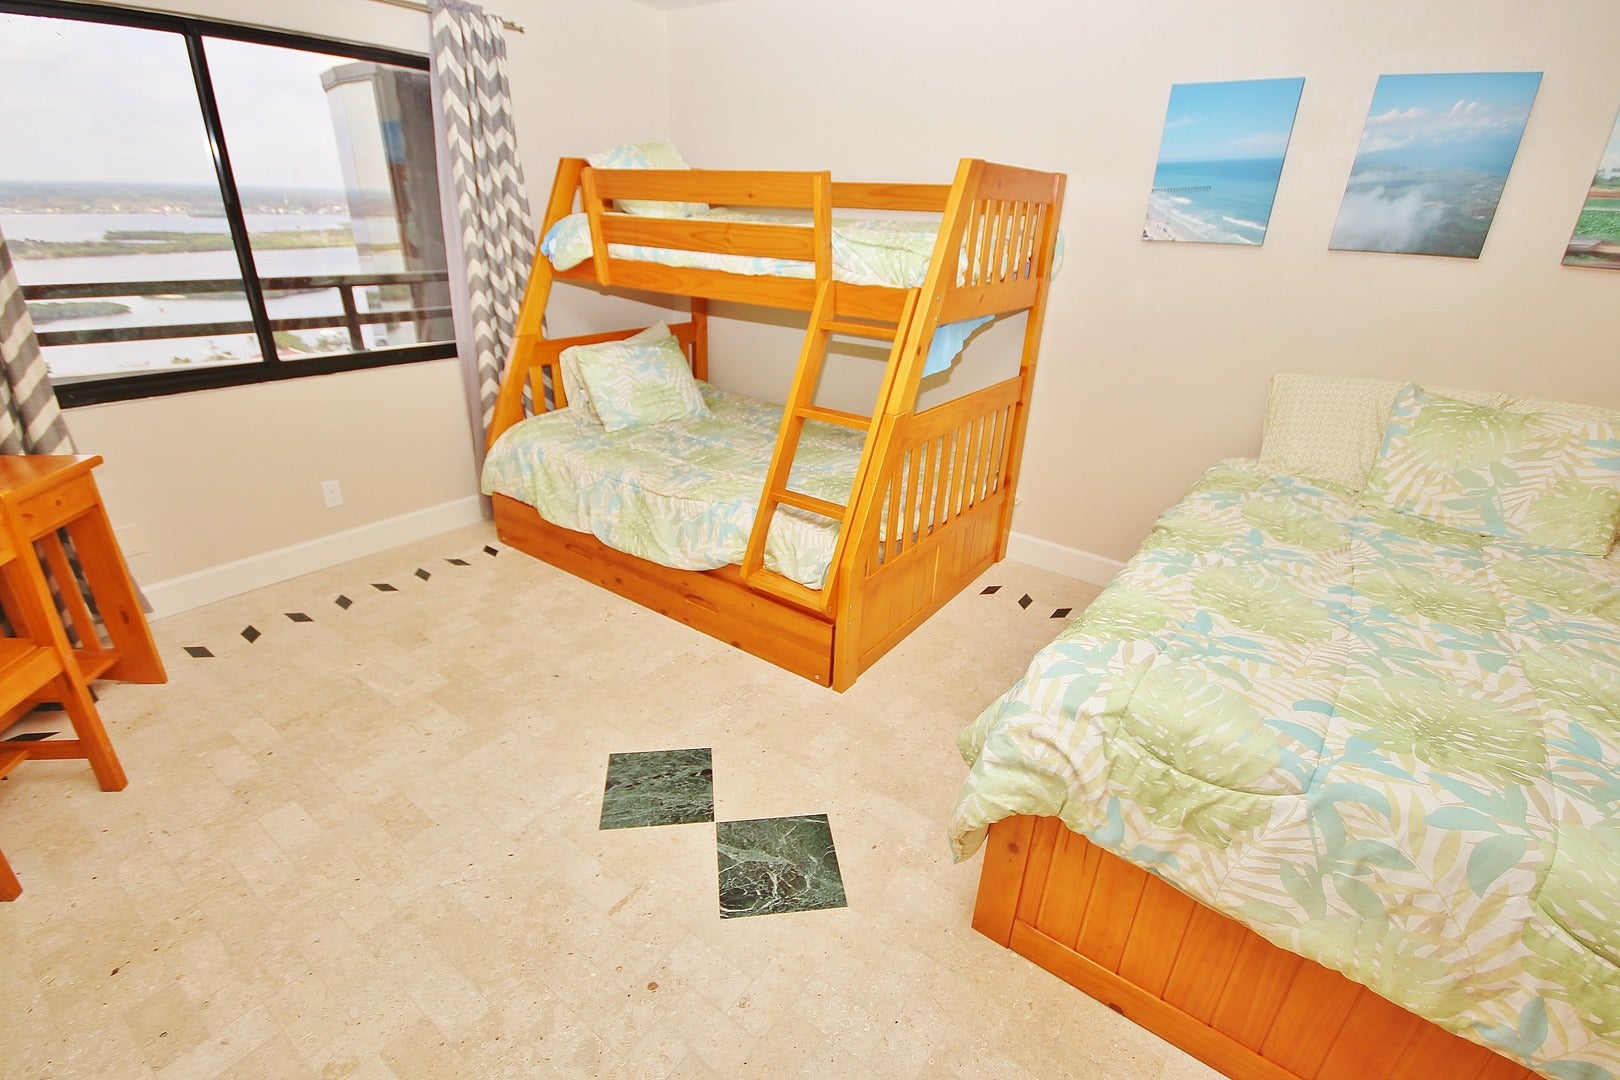 The second bedroom features a double bed and a bunk bed that as a double on the bottom